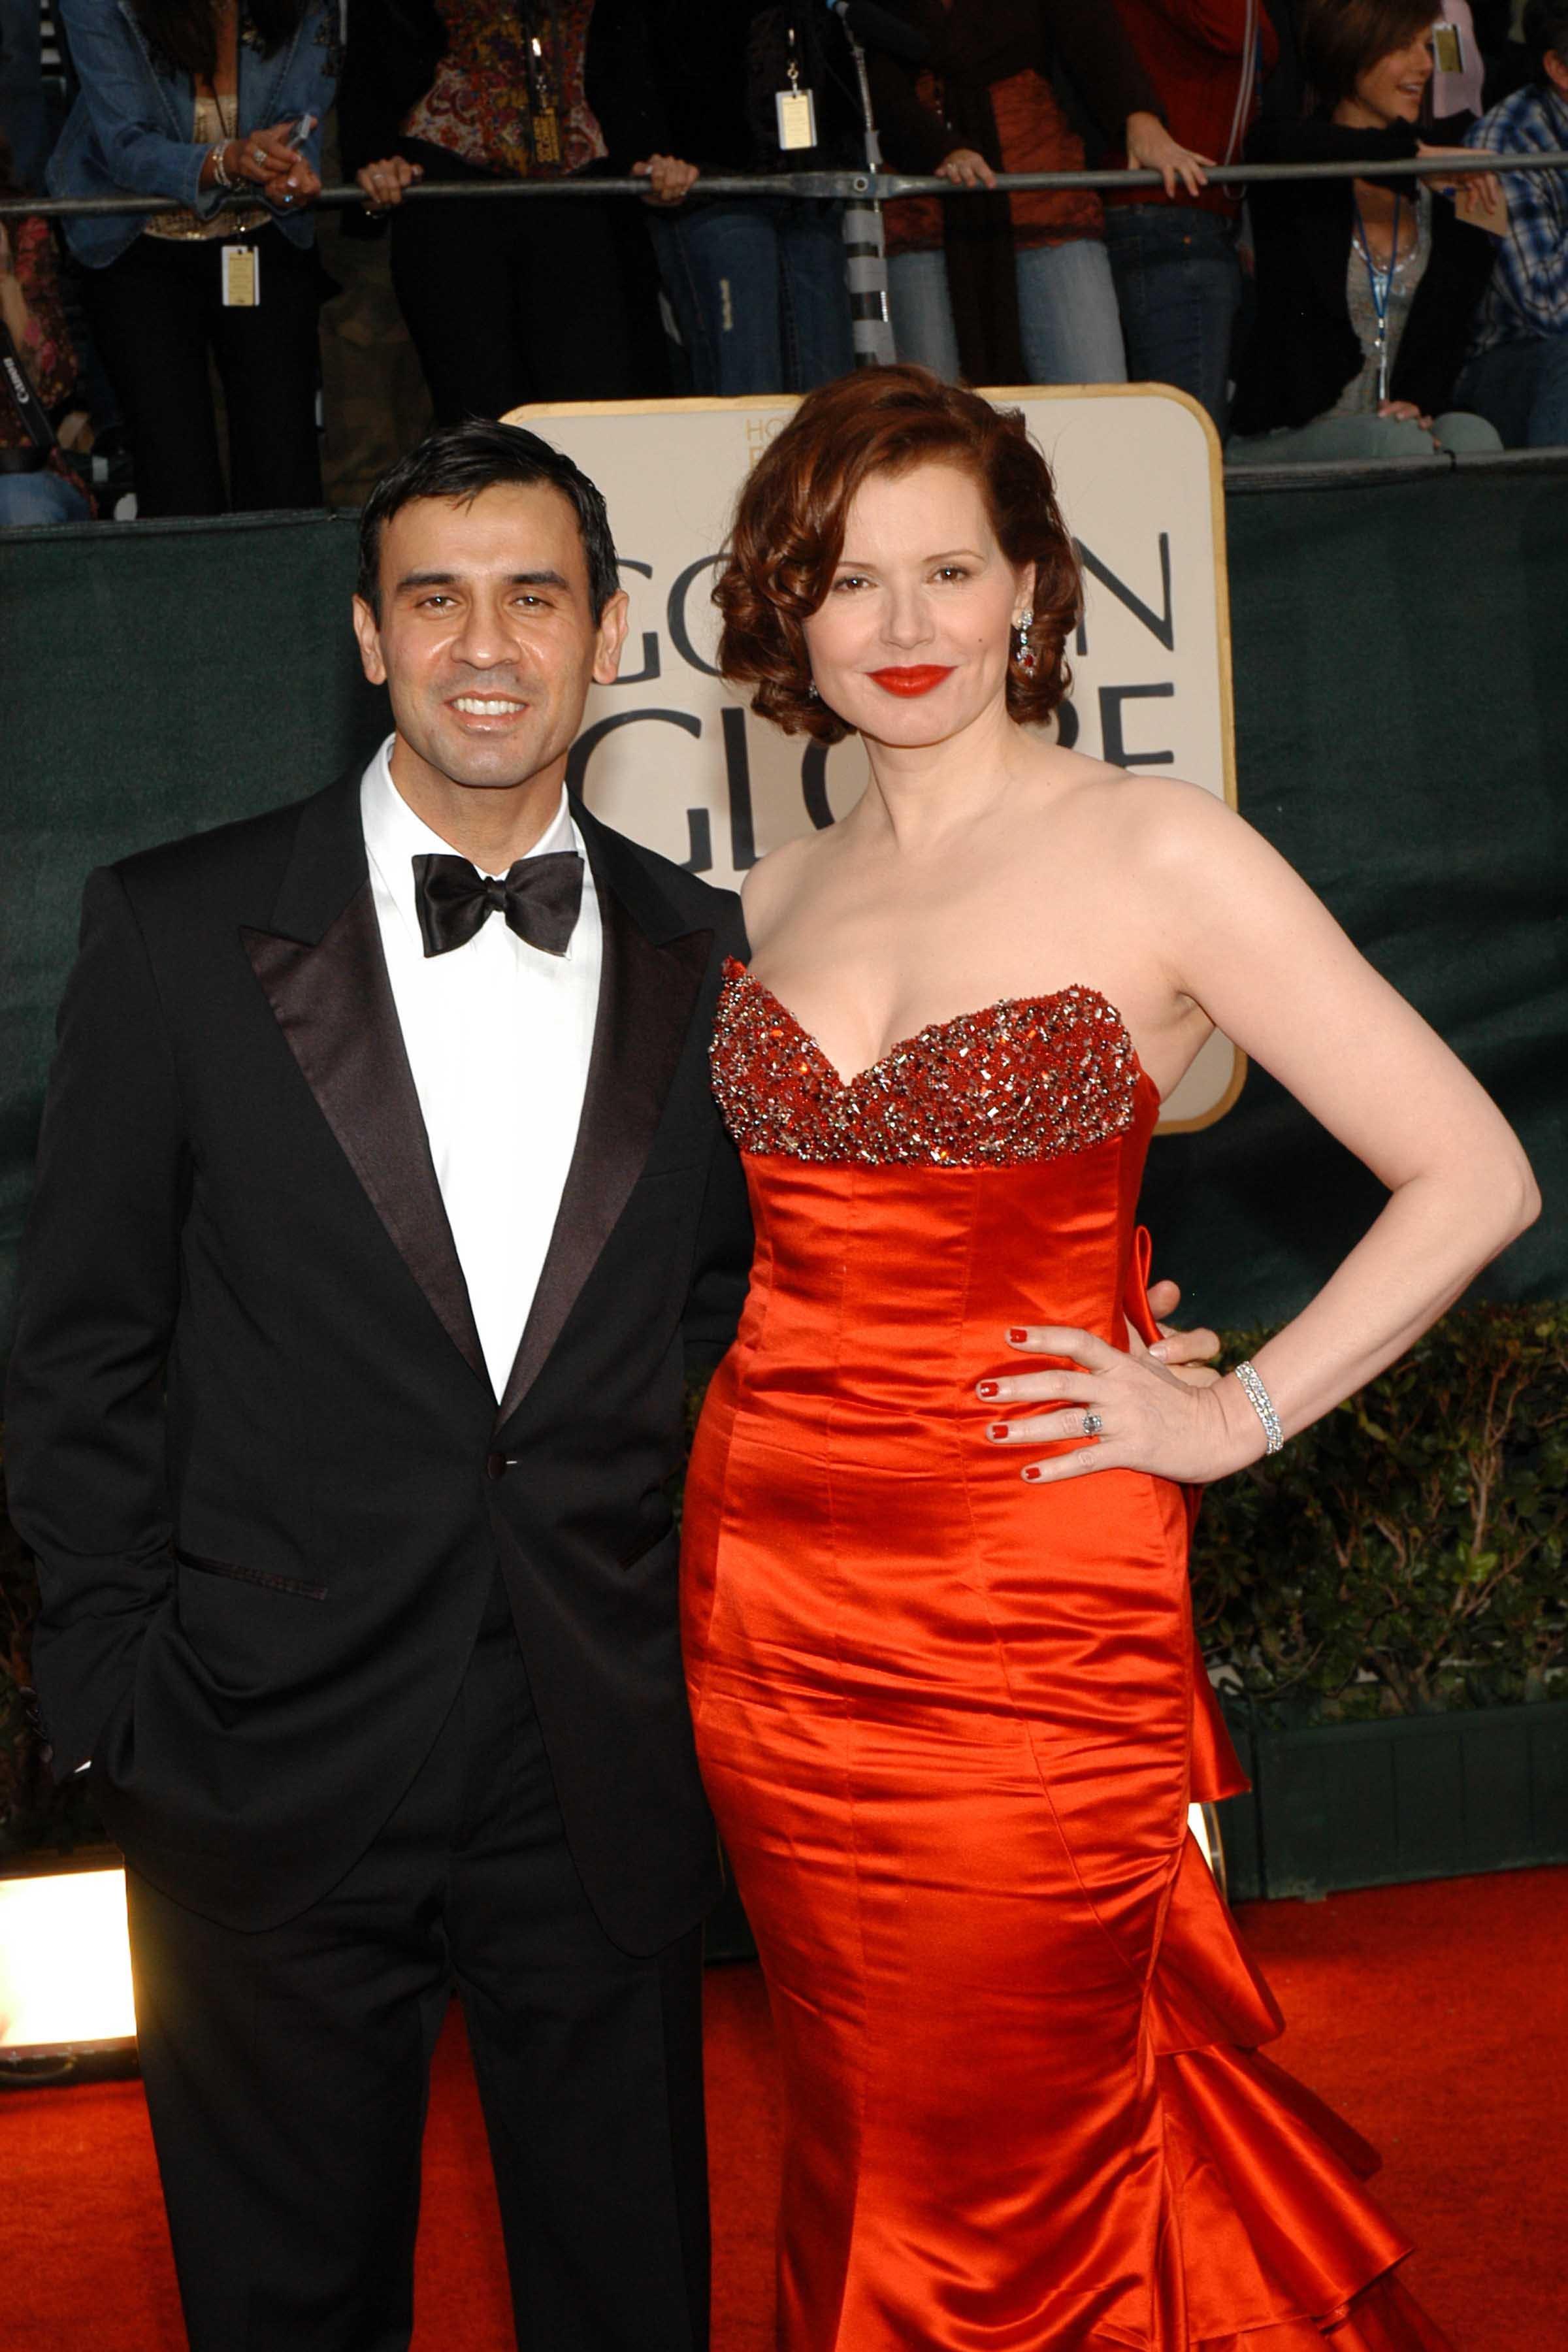 Dr. Reza Jarrahy and Geena Davis during The 63rd Annual Golden Globe Awards - Red Carpet arrivals at The Beverly Hilton on January 16, 2006 in Beverly Hills, California. / Source: Getty Images